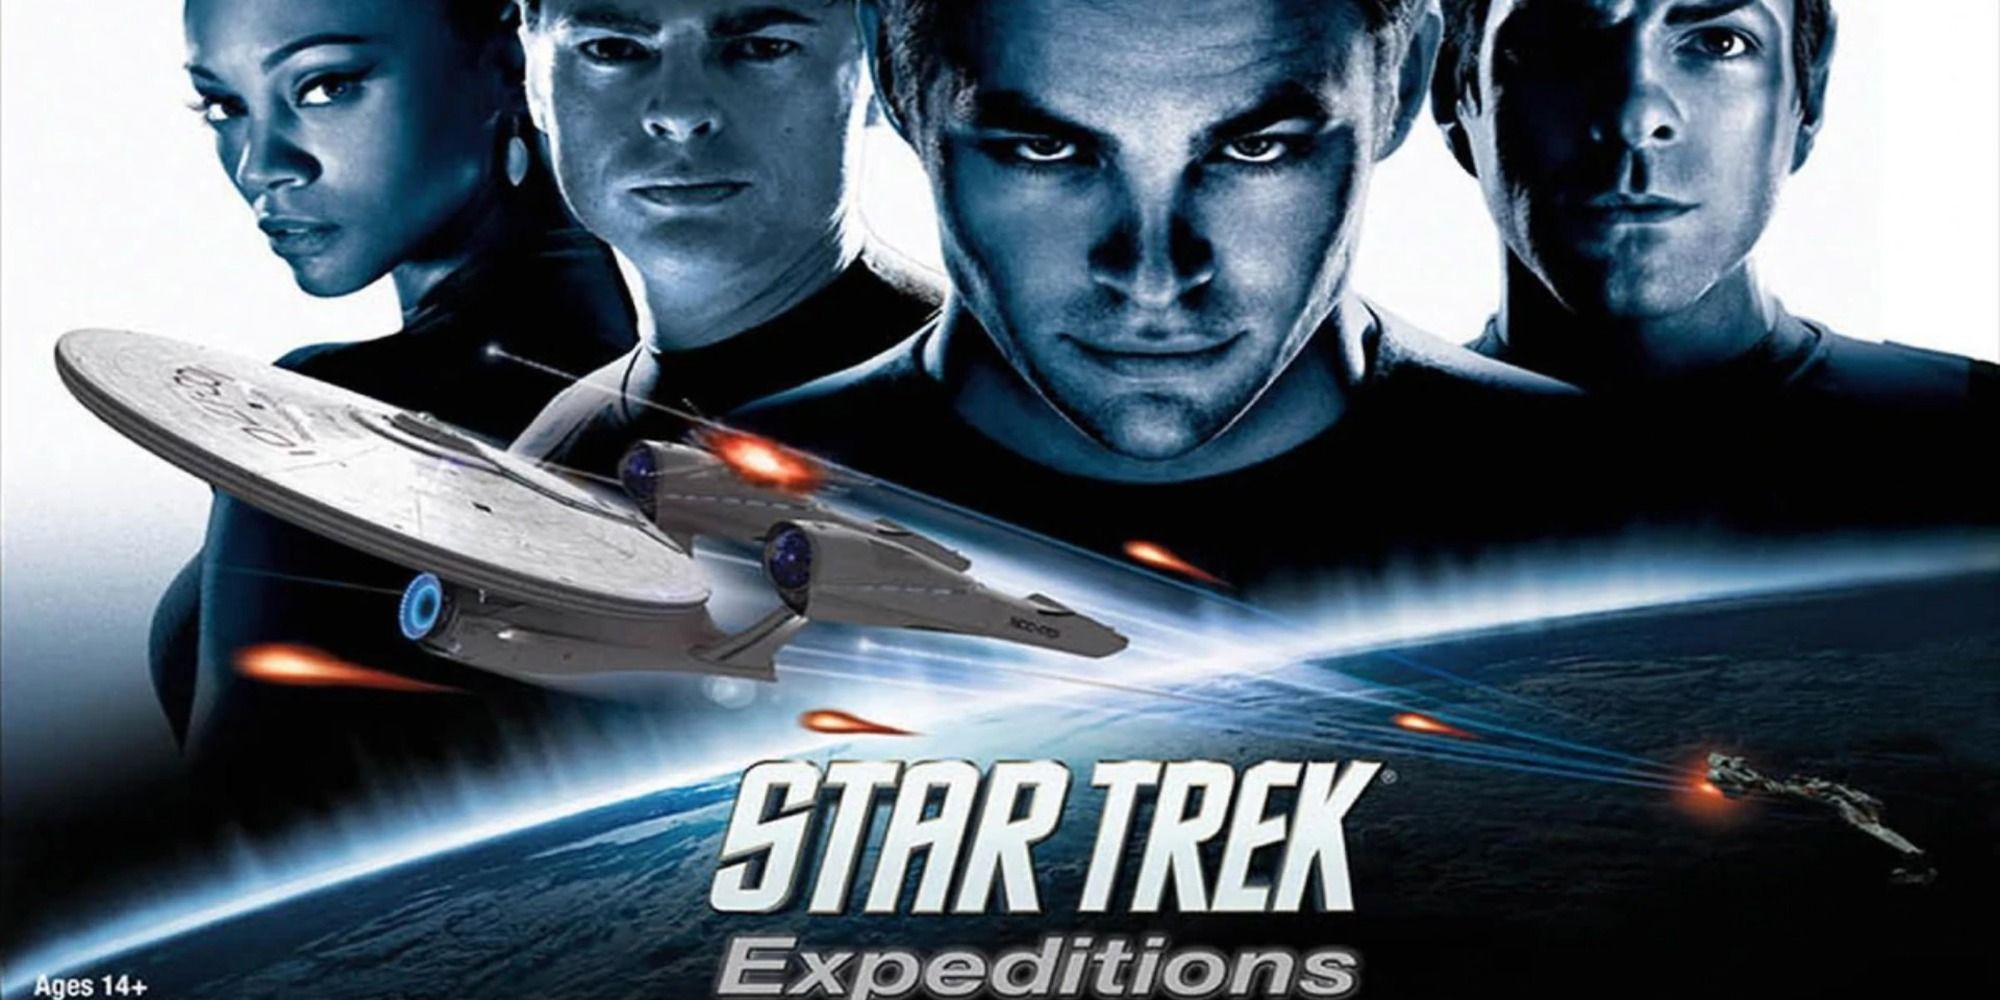 Star Trek Expeditions tabletop game cover showing Uhura, Bones, Kirk and Spock from the 2007 Star Trek movie